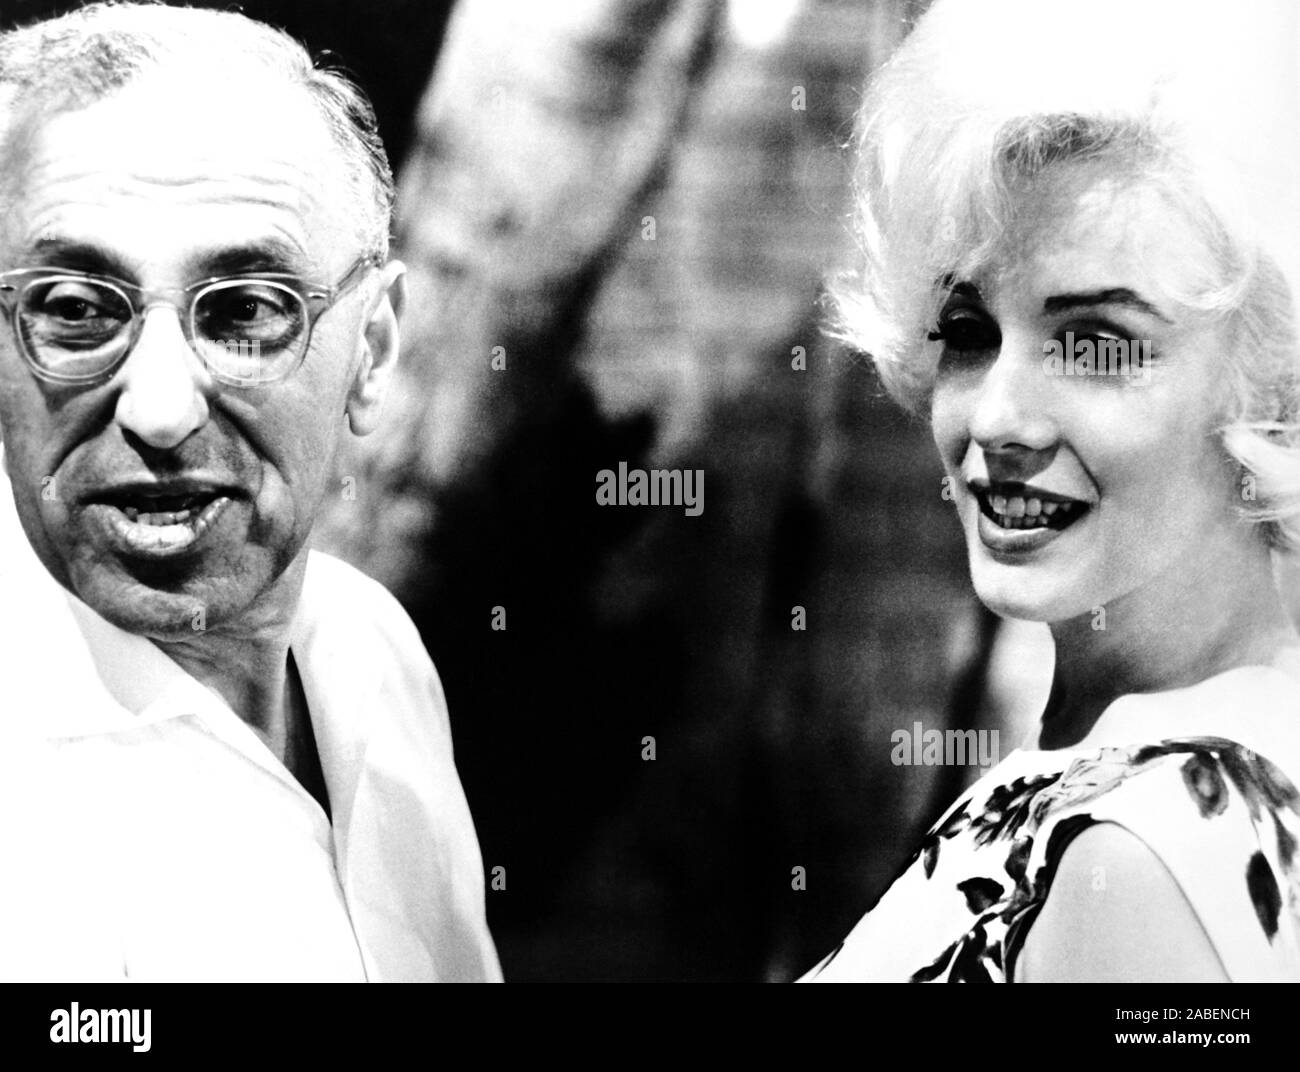 SOMETHING'S GOT TO GIVE, from left, director George Cukor, Marilyn Monroe, on-set, April 1962, TM & Copyright ©20th Century Fox Film Corp./courtesy Everett Collection Stock Photo